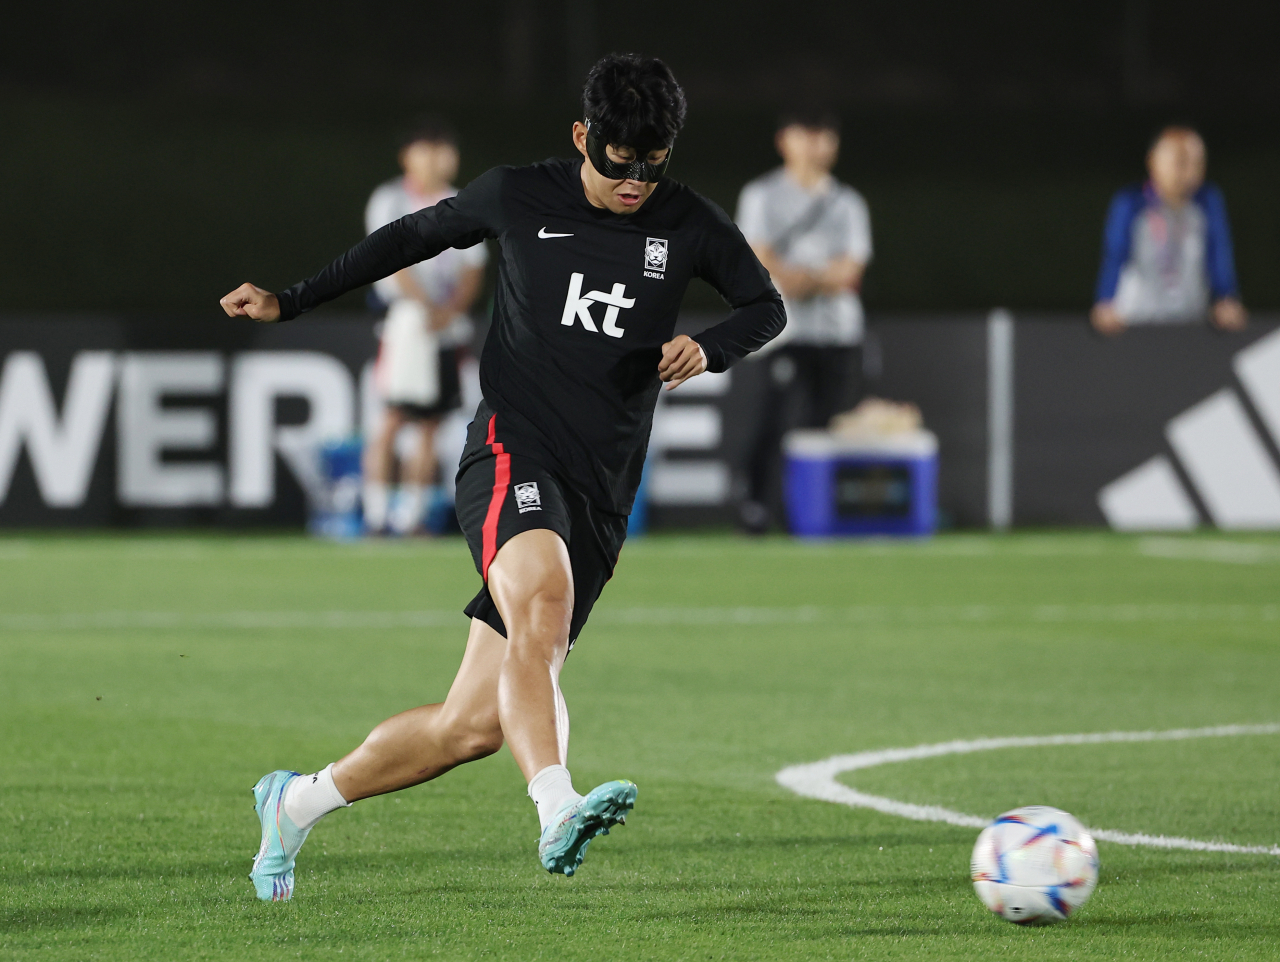 Son Heung-min, captain of the South Korean national soccer team, trains ahead of the World Cup at the Al Egla training facility in Doha, Qatar, Saturday. (Yonhap)